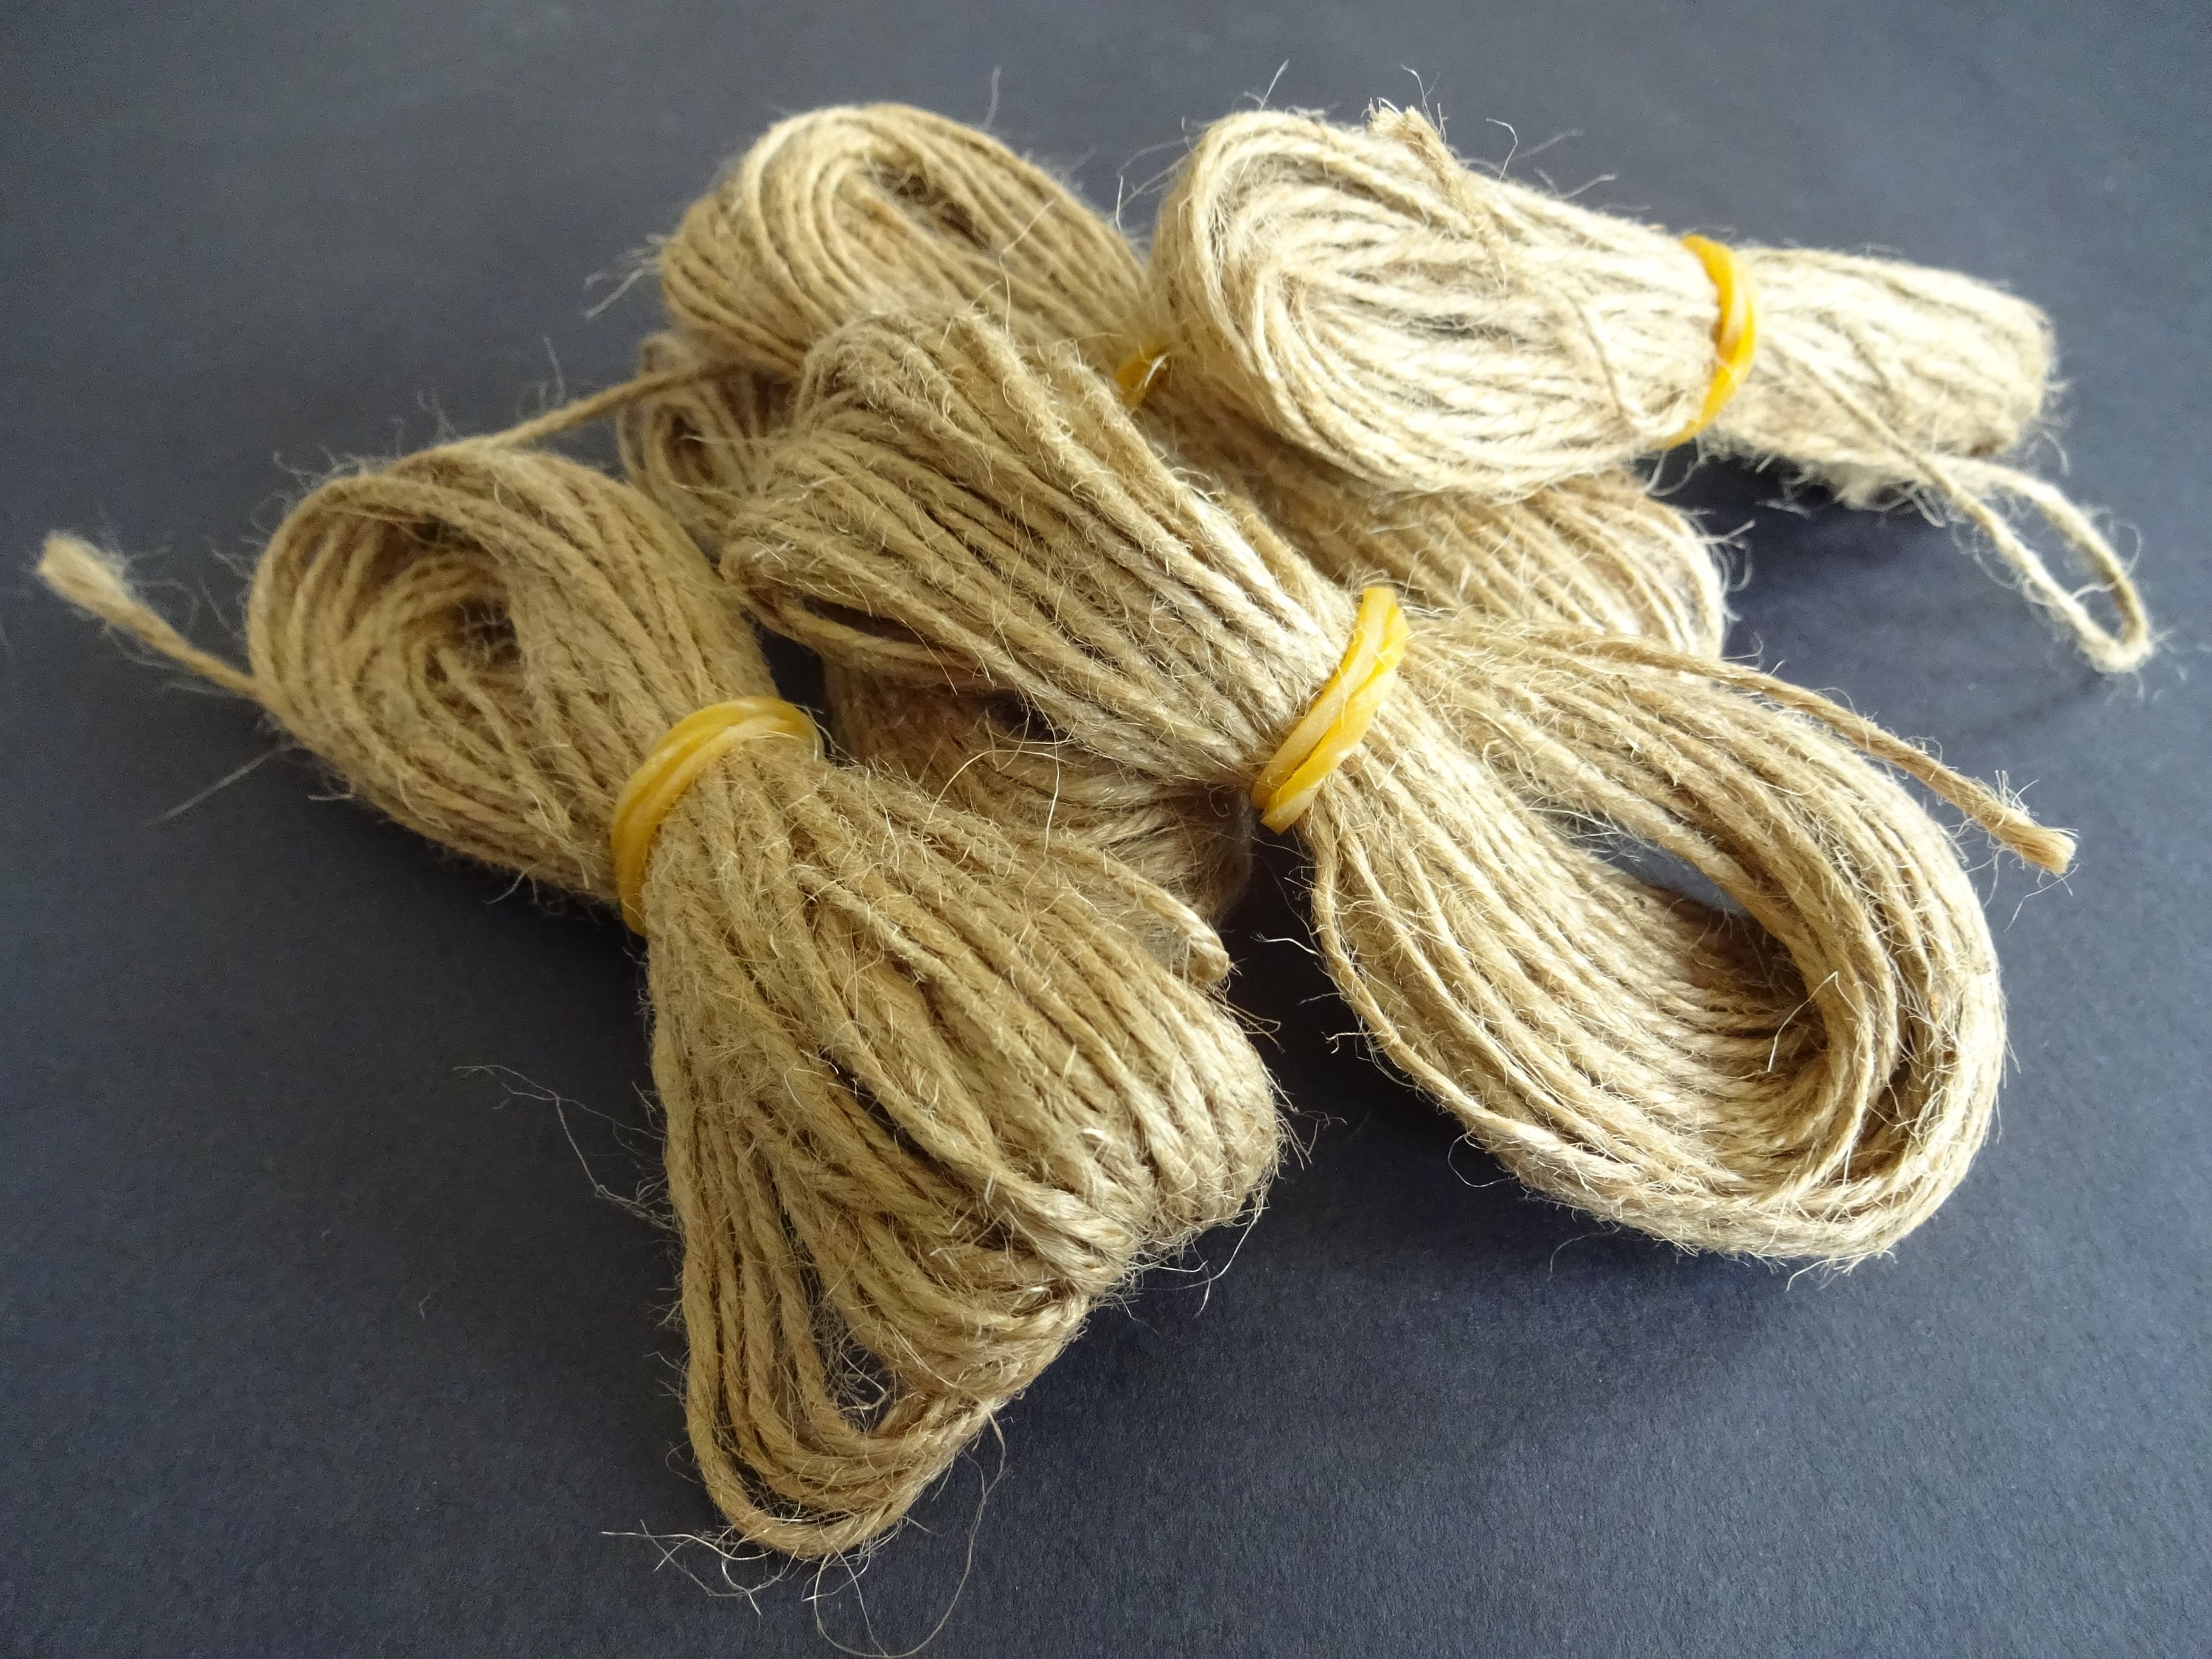 100 Meters Of Hemp Cord, 2mm Diameter, Bulk Lot, Tan Beige Color, Spool Of Necklace  Cord, Neutral, Perfect For Crafts and Jewelry Making